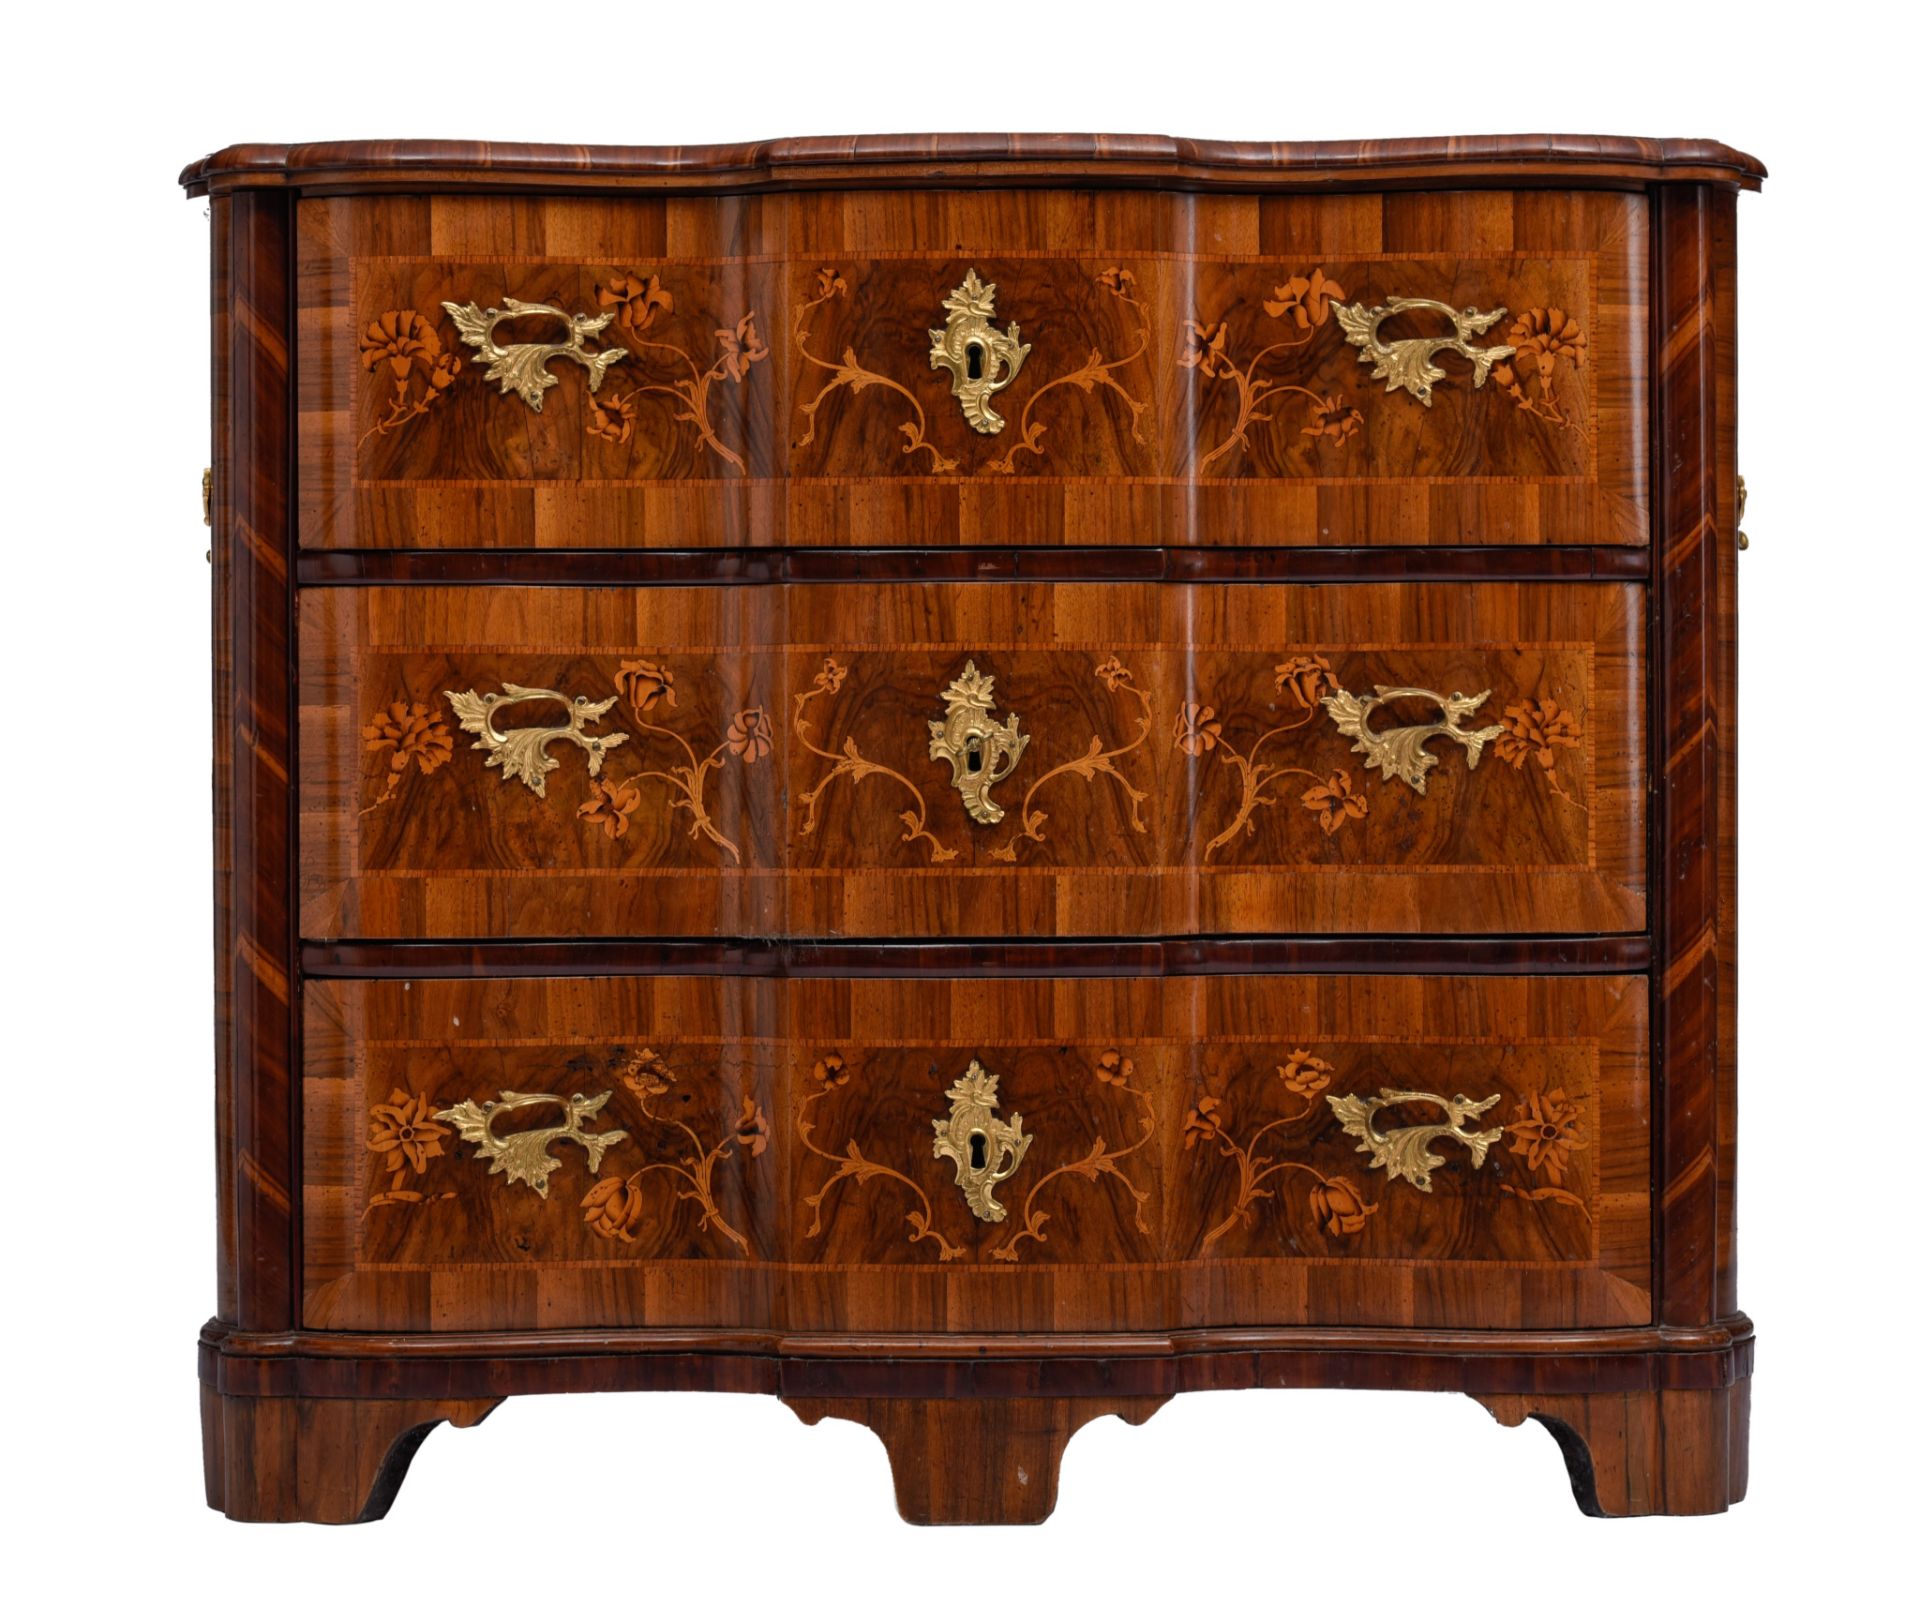 A magnificent German Rococo commode with elegant floral marquetry, mid 18thC, H 93 - W 112 - D 56 cm - Image 2 of 13